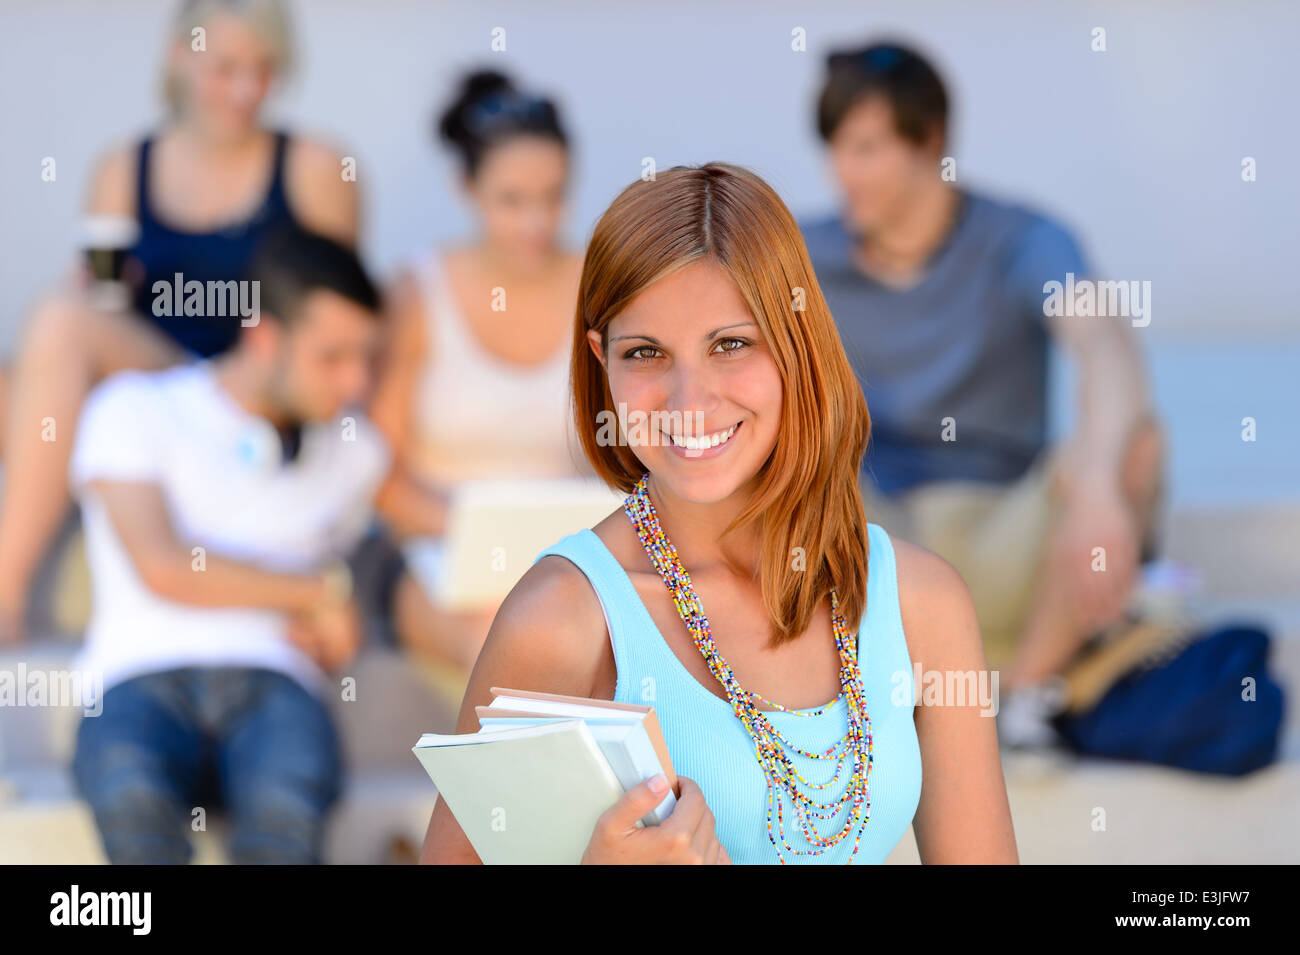 Summer college student girl smiling holding books friends in background Banque D'Images